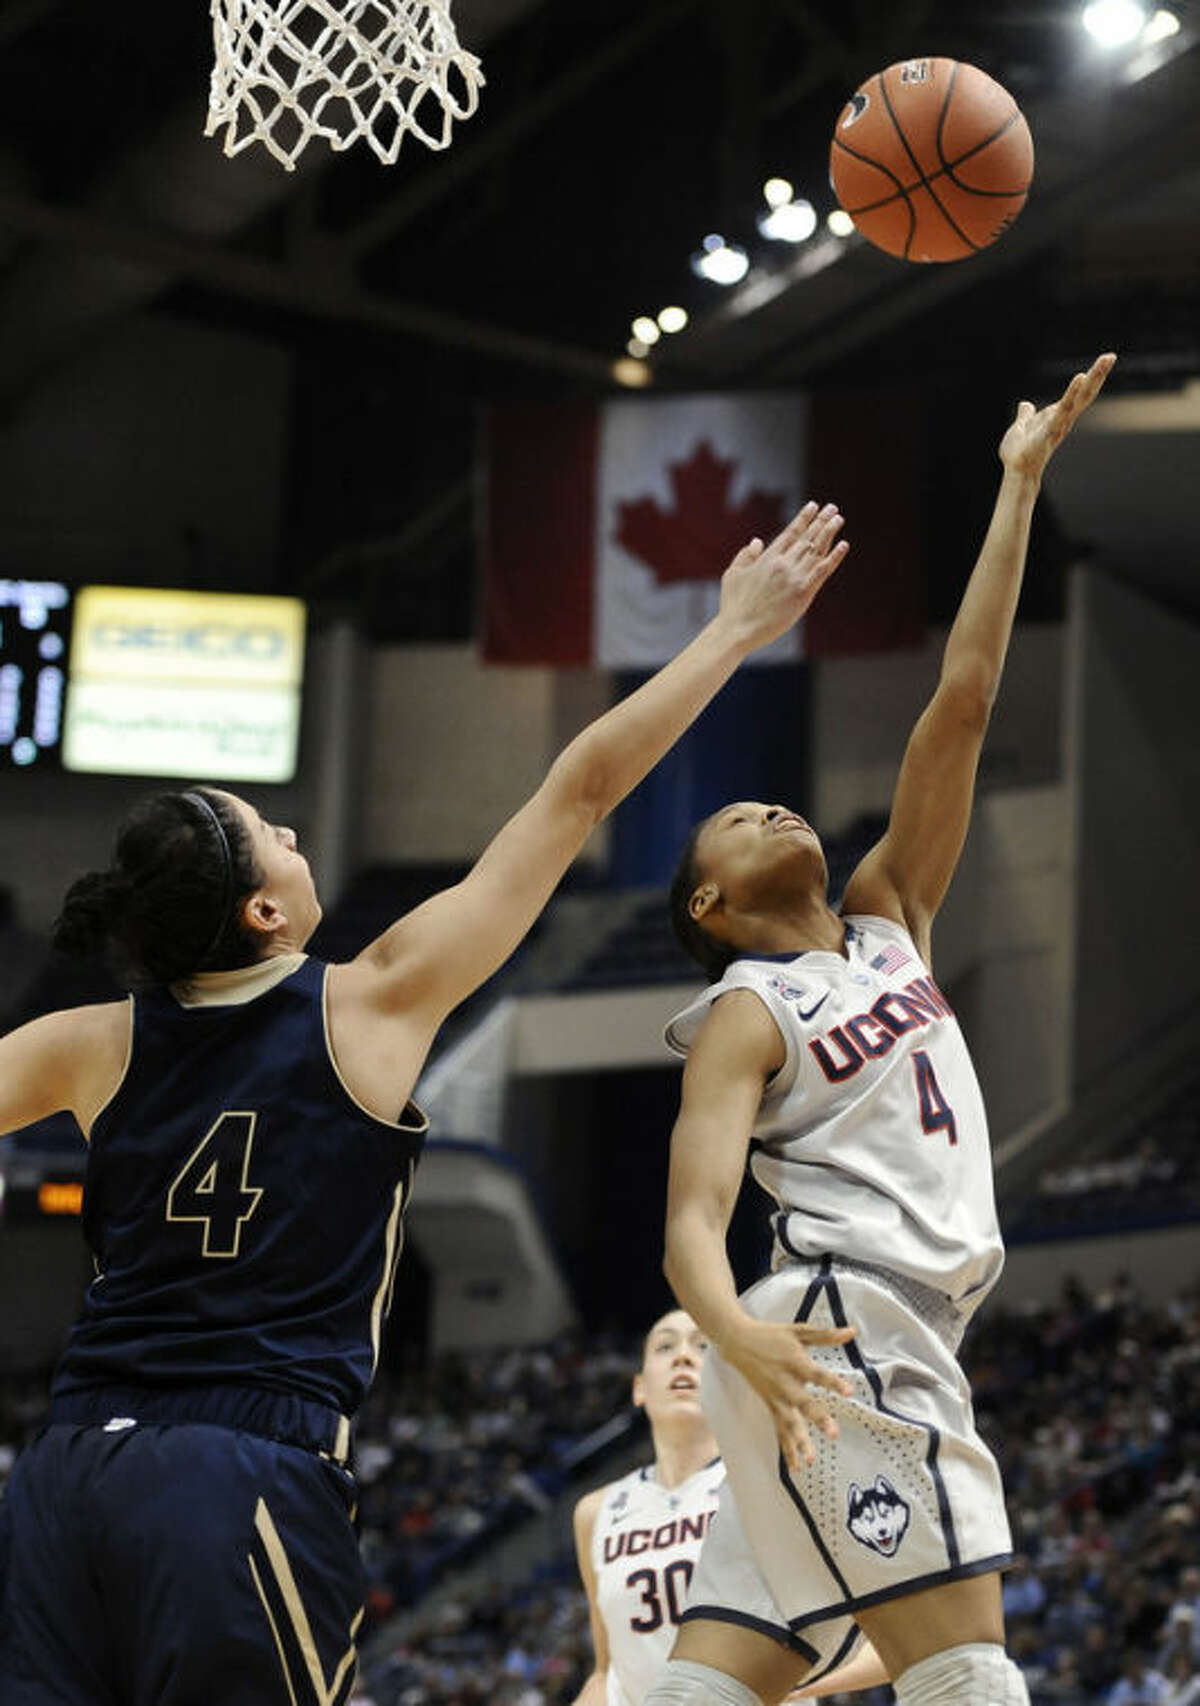 Connecticut's Moriah Jefferson, right, shoots over UC Davis' Idit Oryon, left, during the first half of an NCAA college basketball game, Thursday, Dec. 5, 2013, in Hartford, Conn. (AP Photo/Jessica Hill)